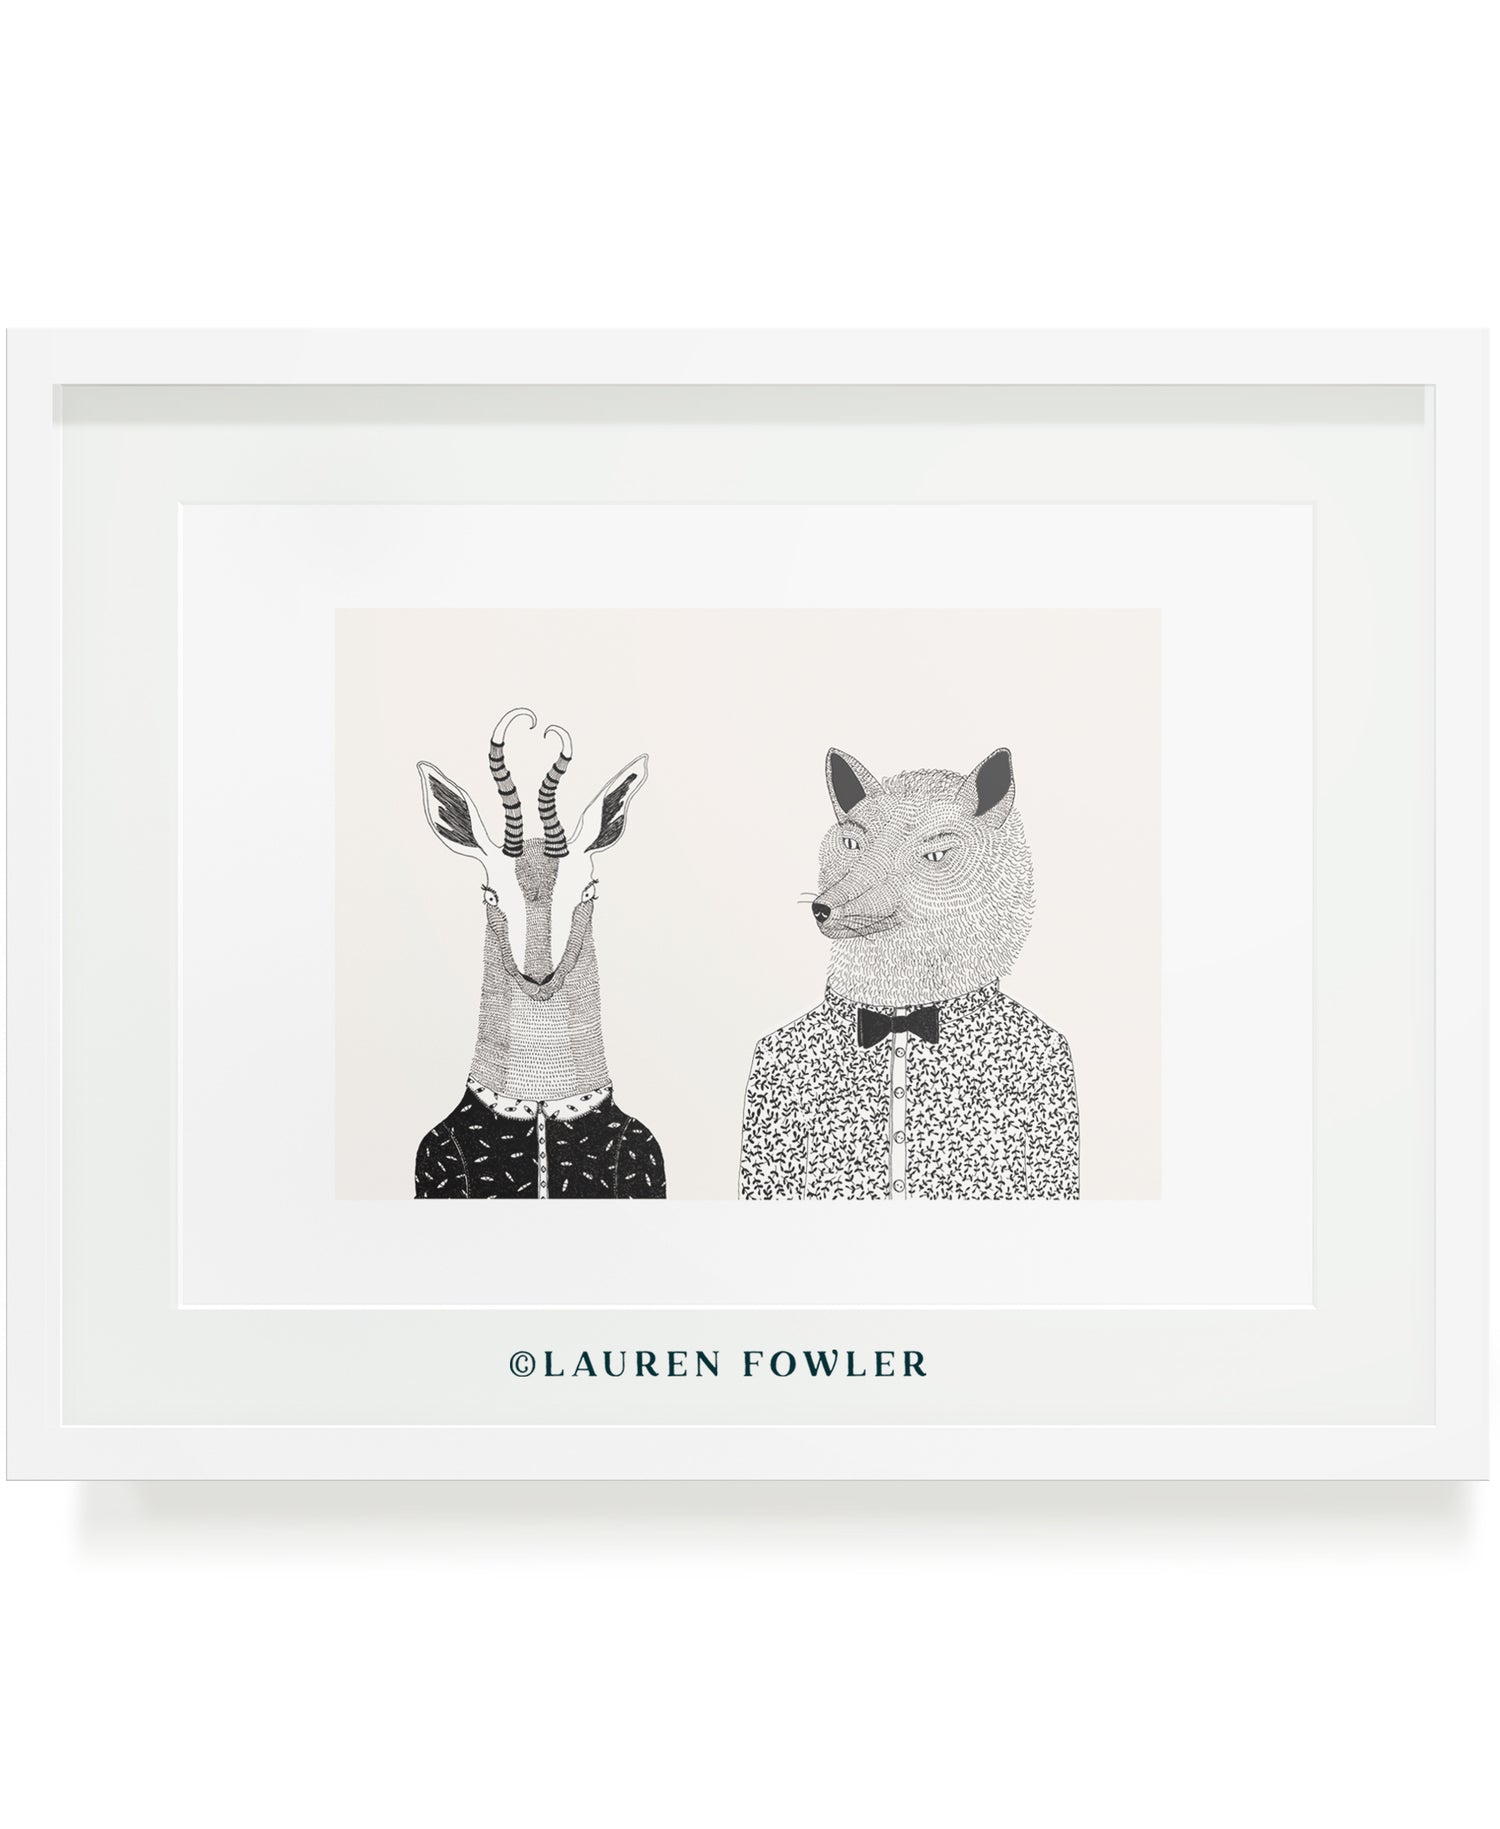 Bokkie and Wolf people as animals illustrated artwork by Lauren Fowler